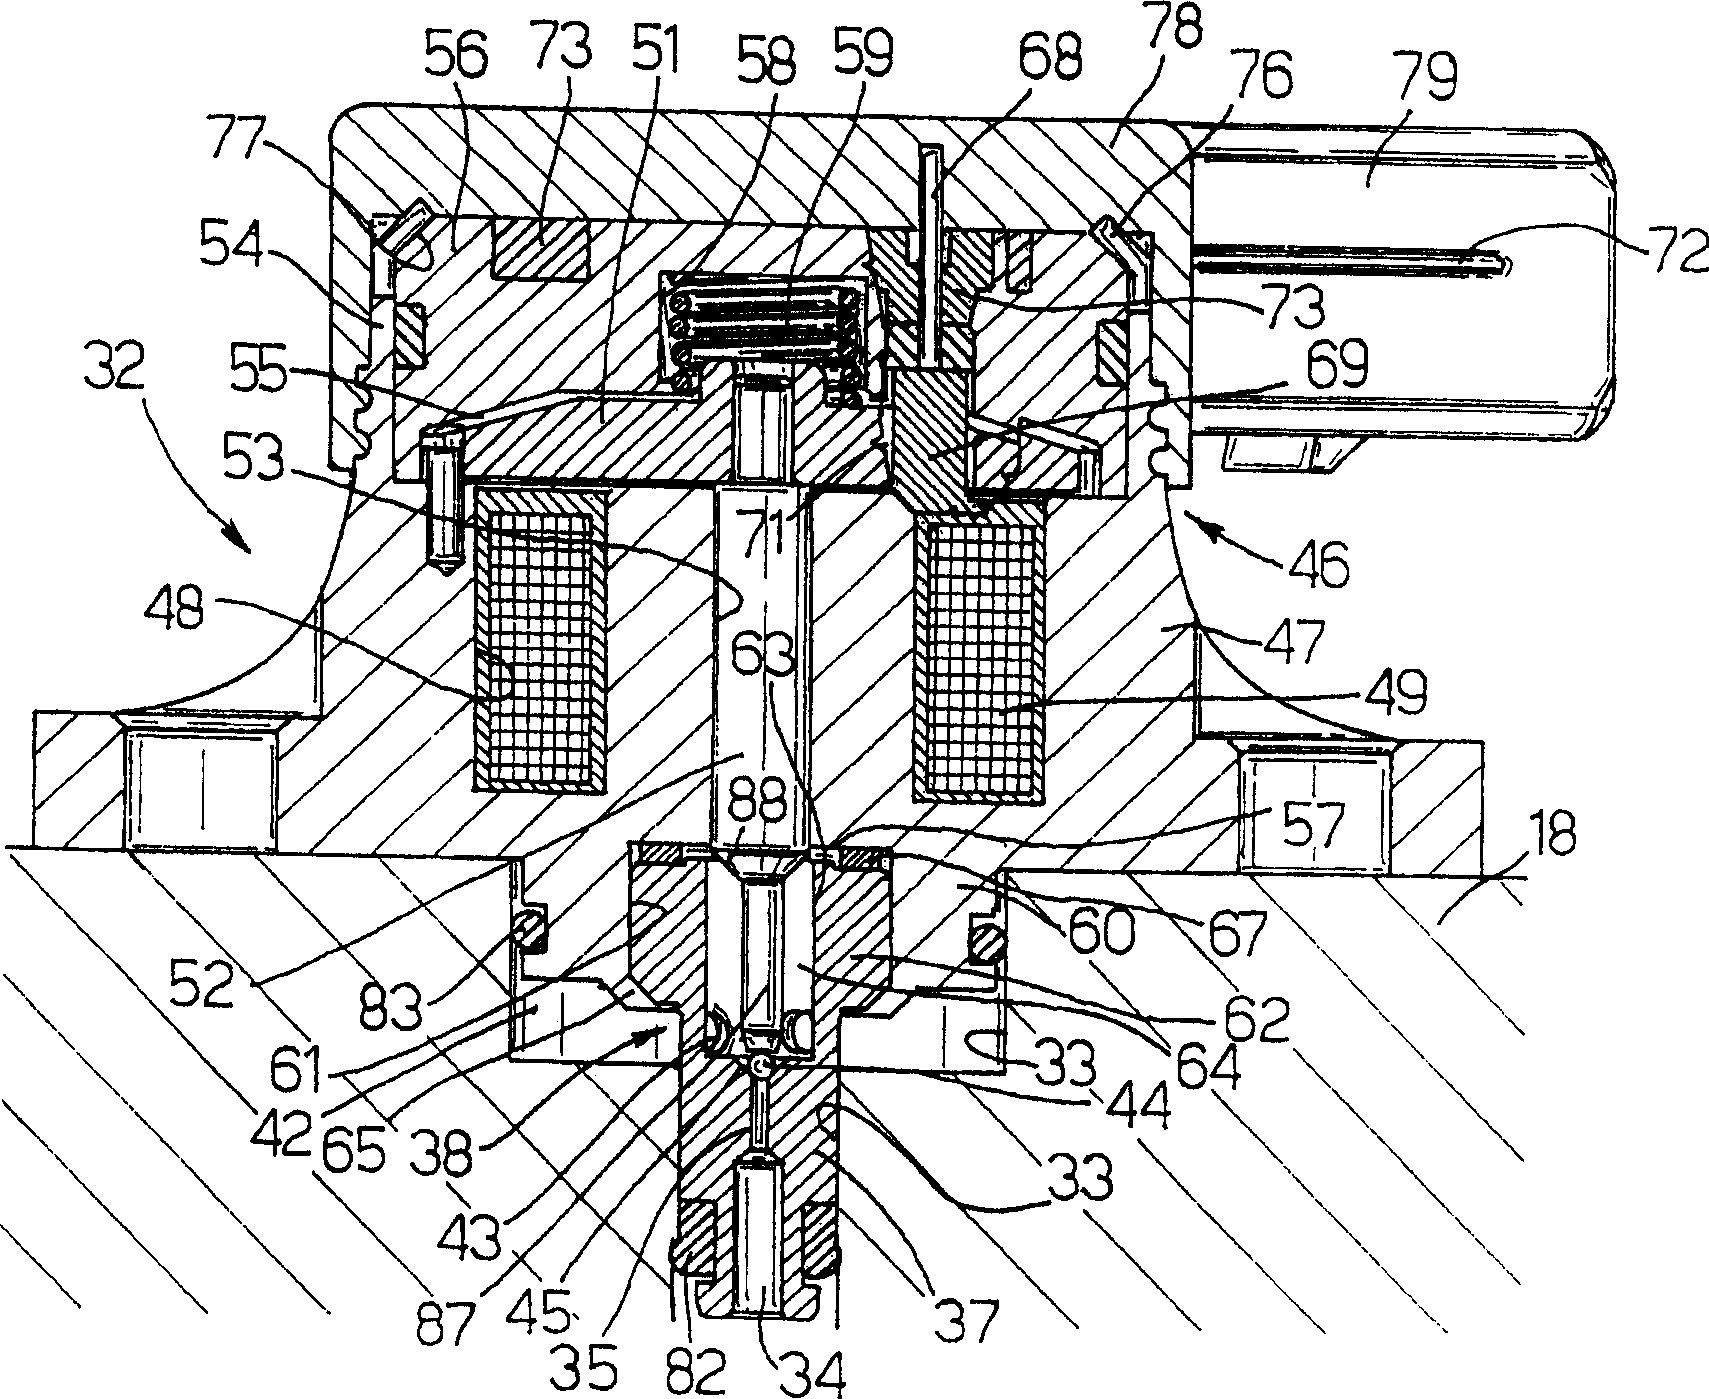 Device for regulating transporting pressure of pump for instance supplying oil to IC engine